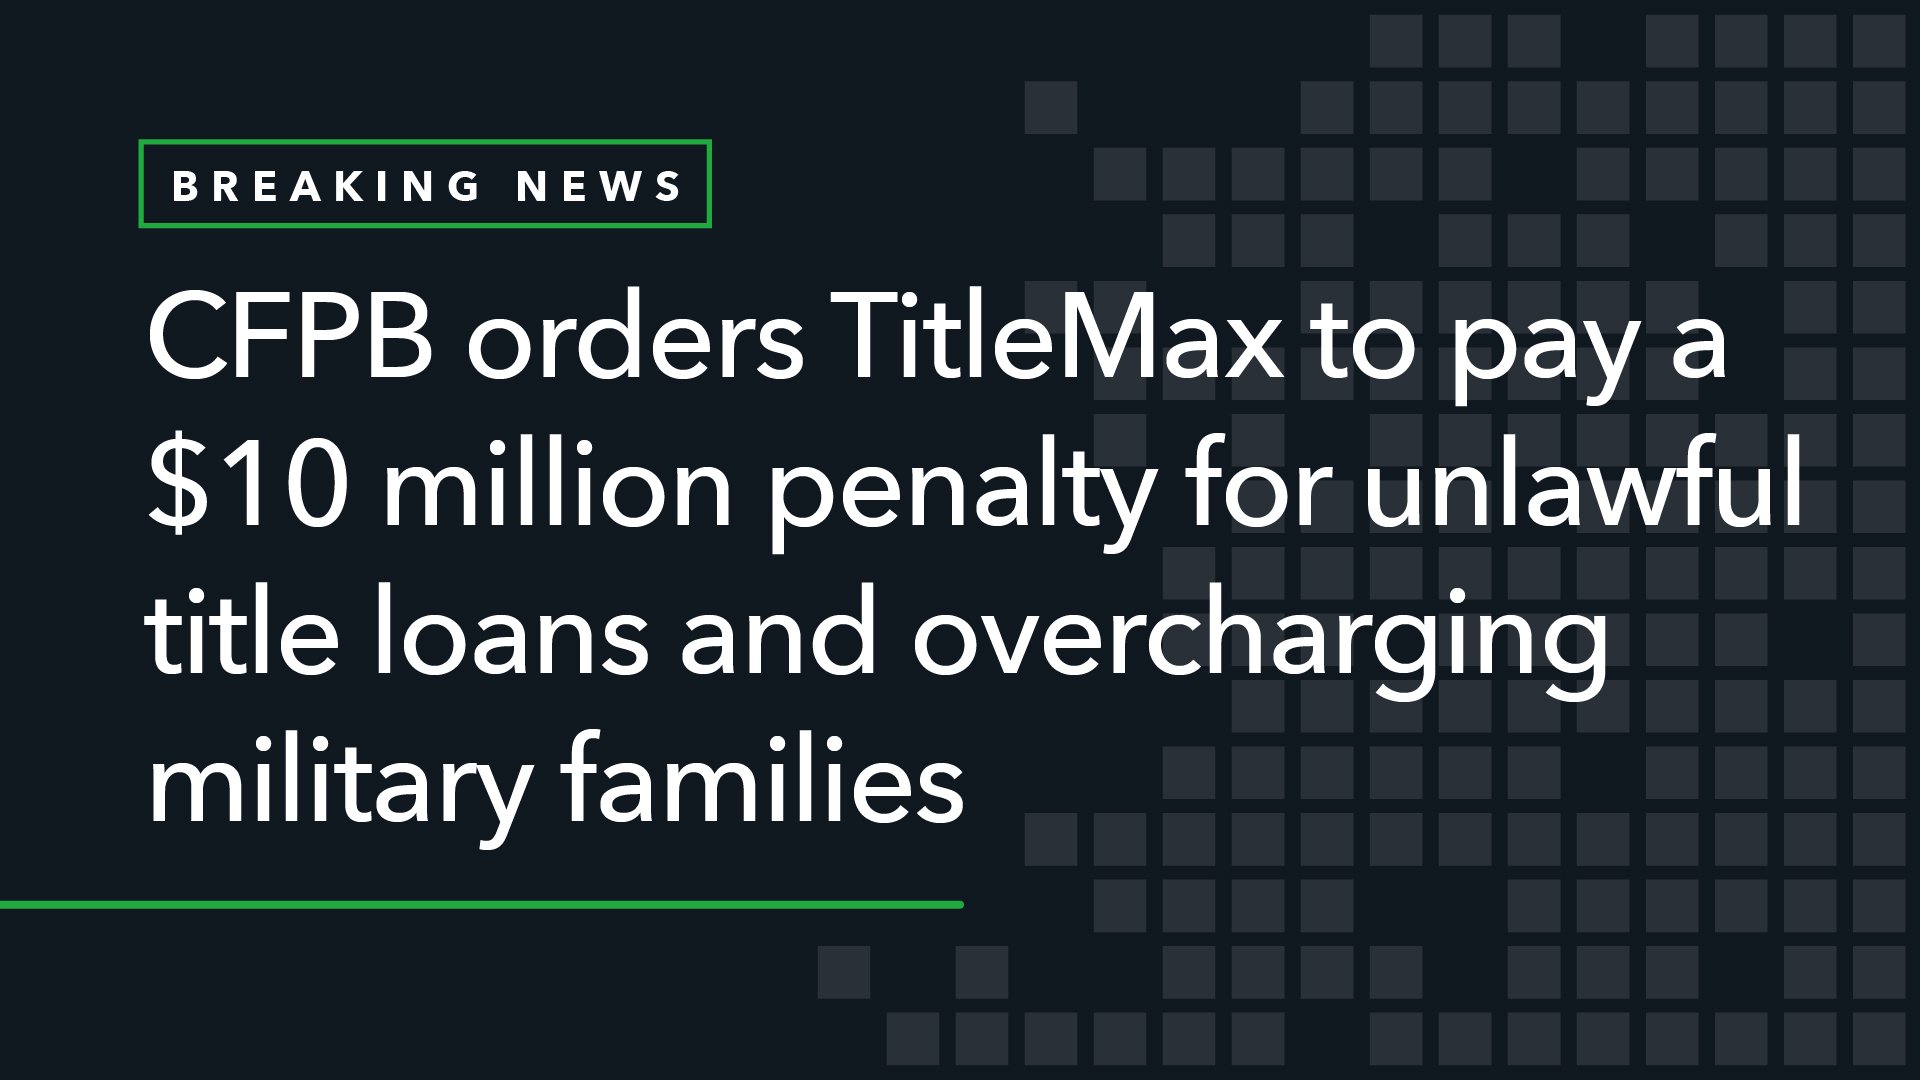 CFPB Orders TitleMax to Pay a  Million Penalty for Unlawful Title Loans and Overcharging Military Families